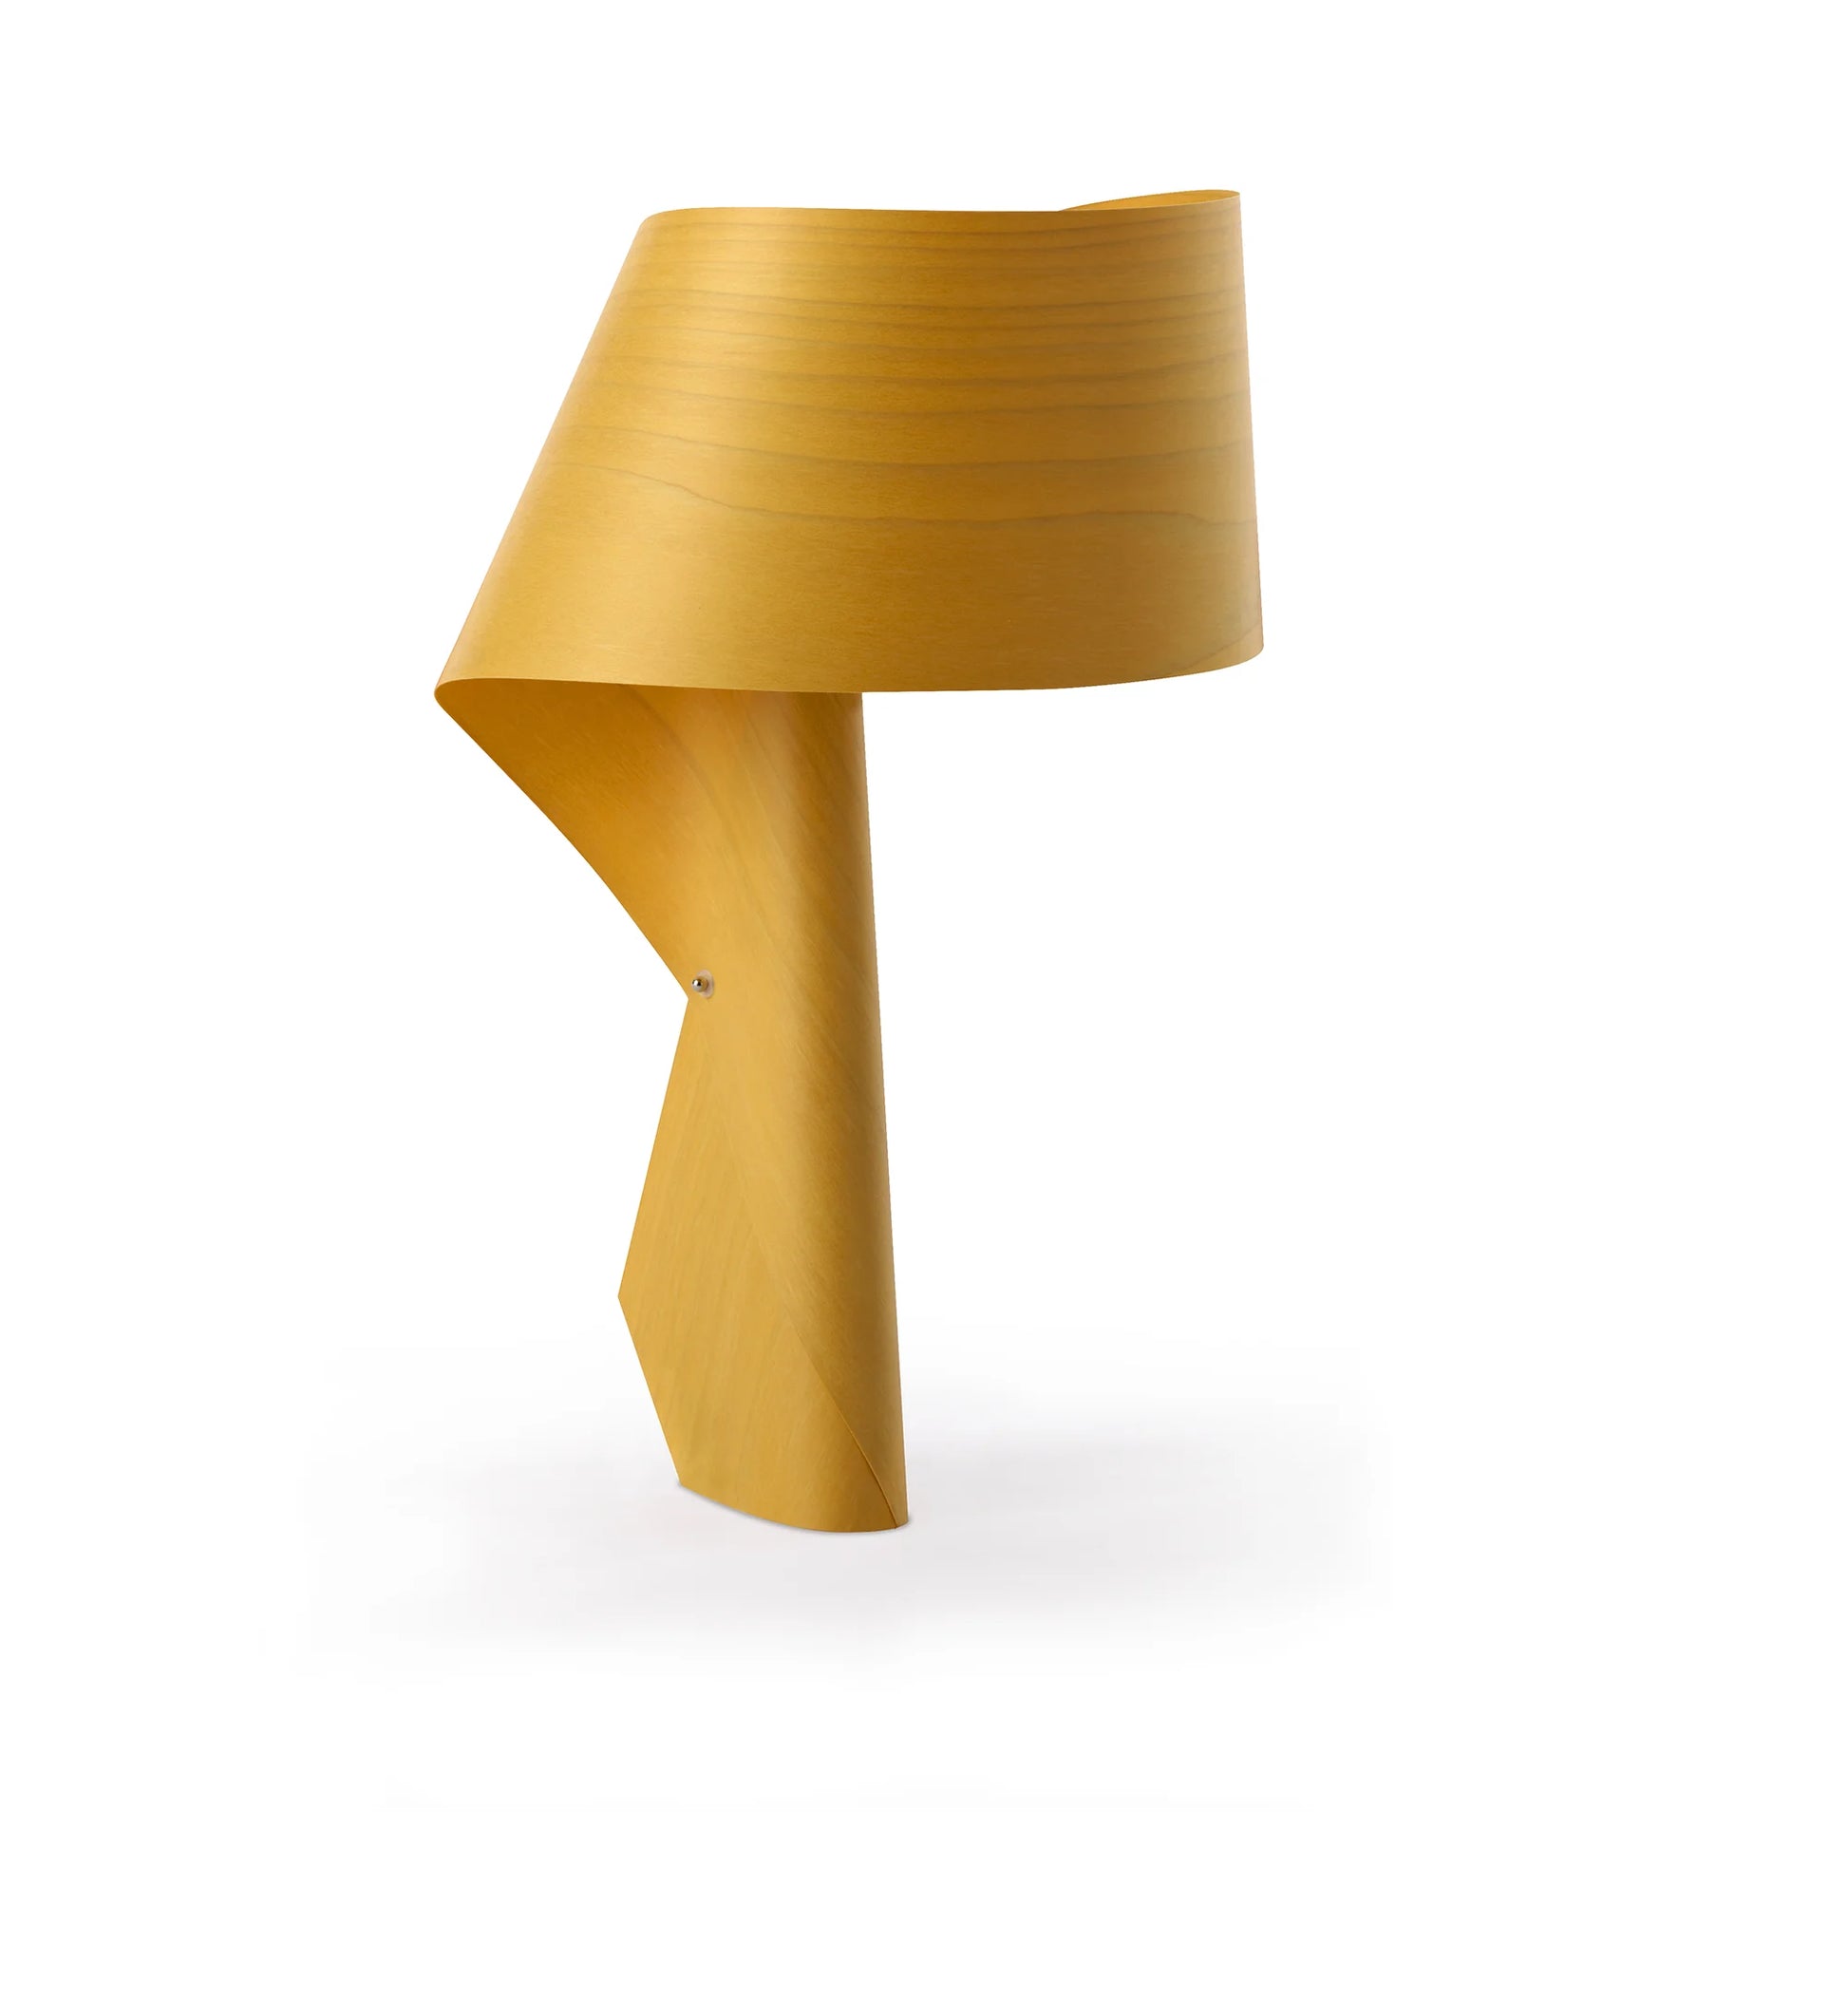 yellow natural wood veneer table lamp. best table light. sustainable table lamp design